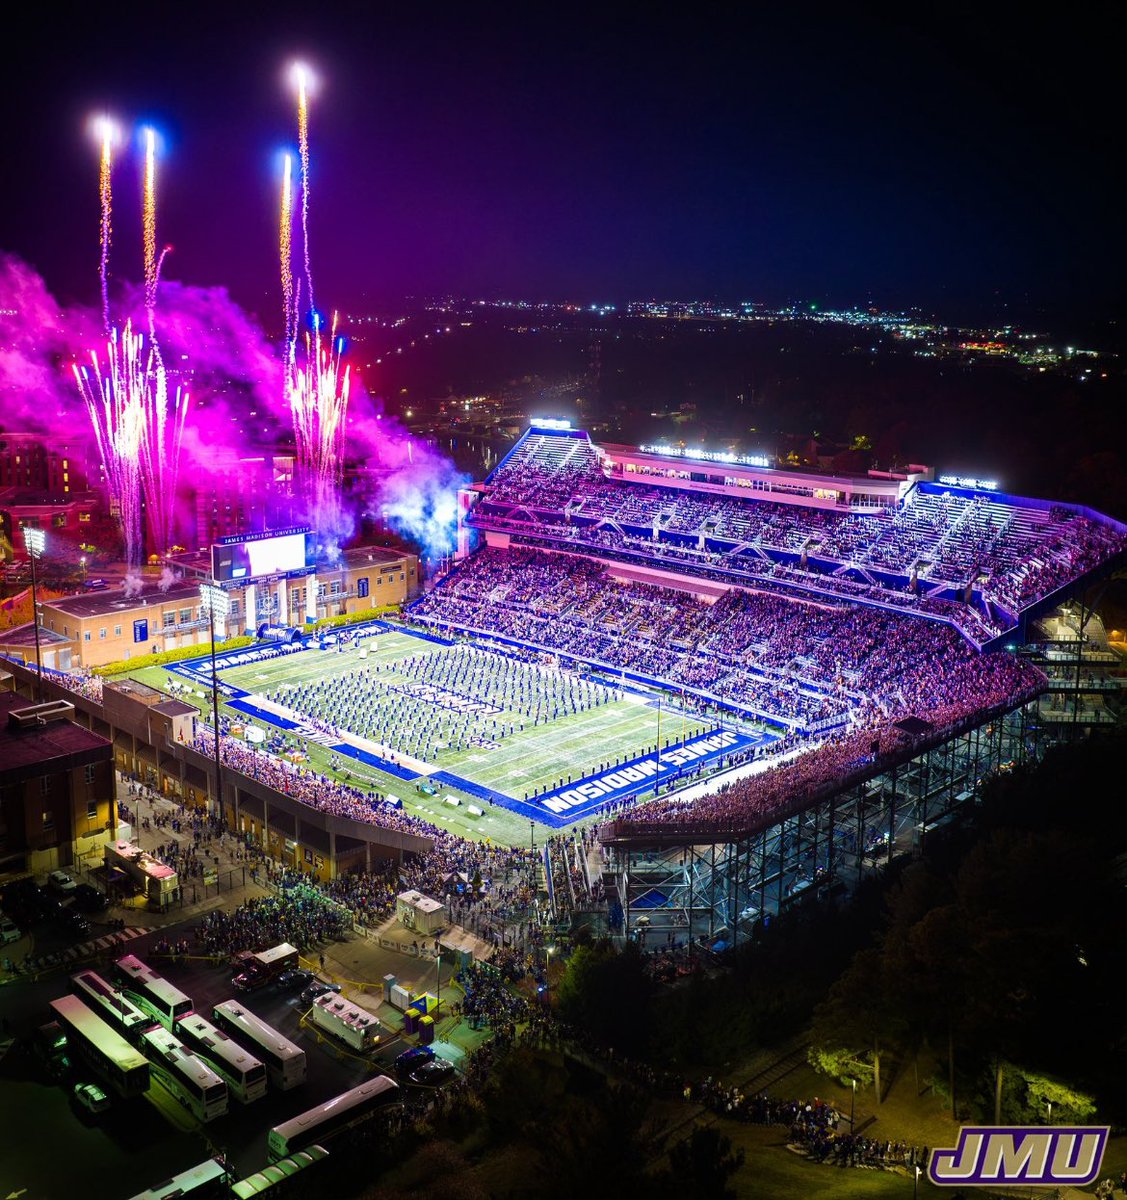 After an amazing call with @Coach_Smith61, I’m honored to receive an offer from @JMUFootball! #AGTG #GoDukes @coachrdodge @SLC_Recruiting @5qpLinepride @Coach_DiMike